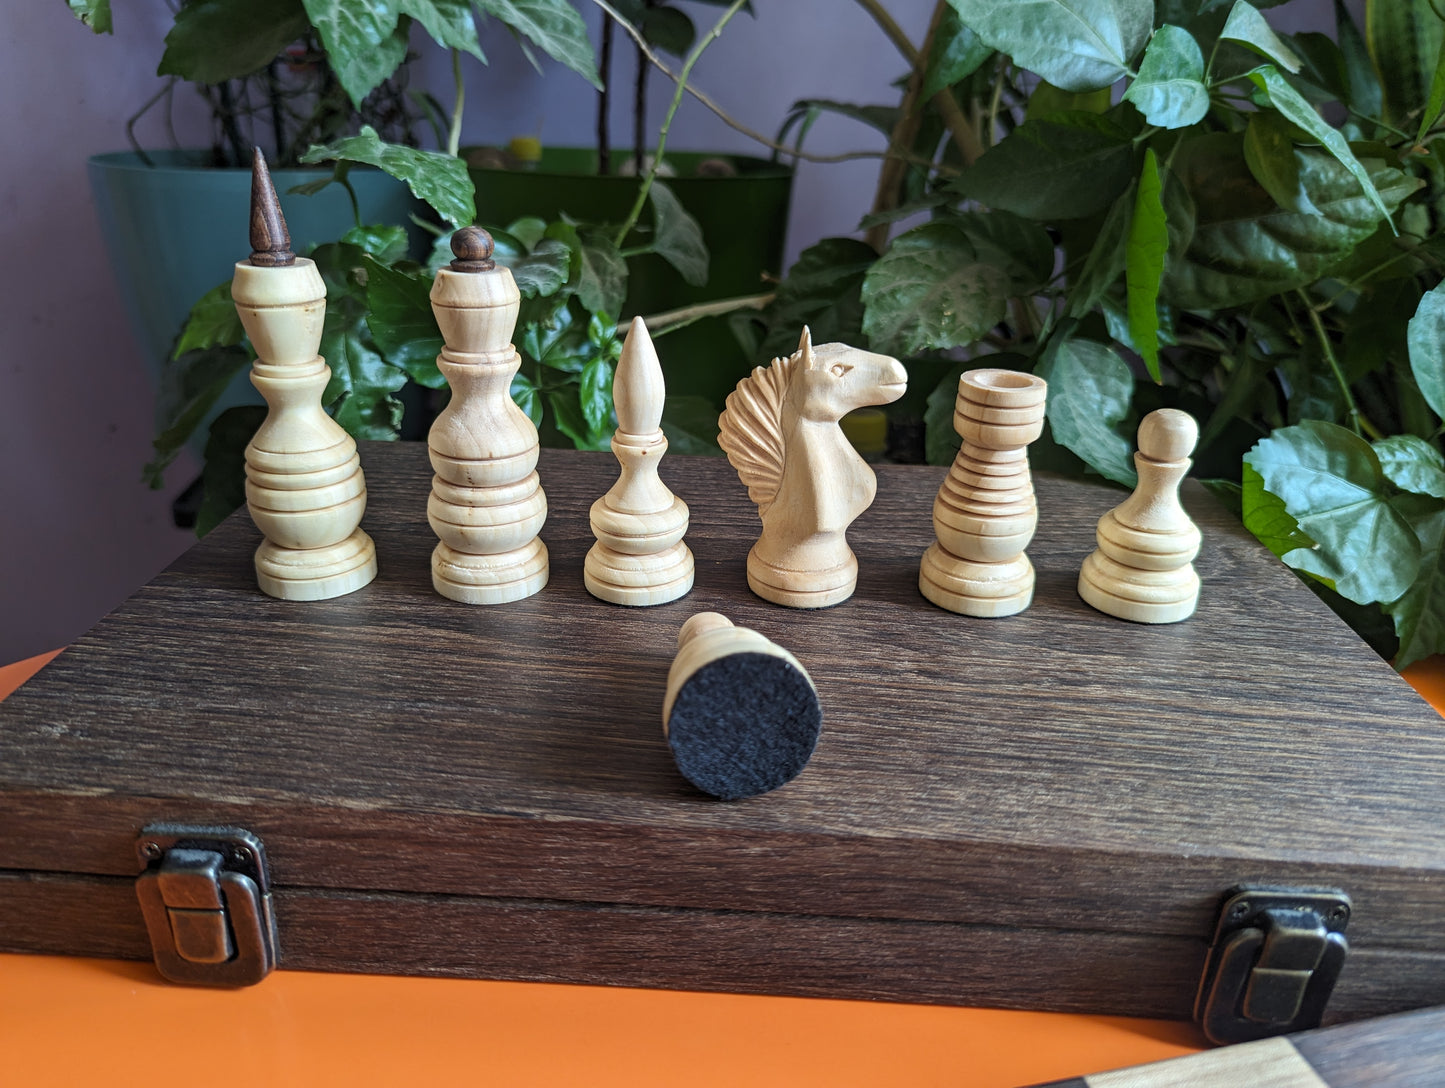 Handcrafted wooden carved chess pieces. White maple and walnut wood.